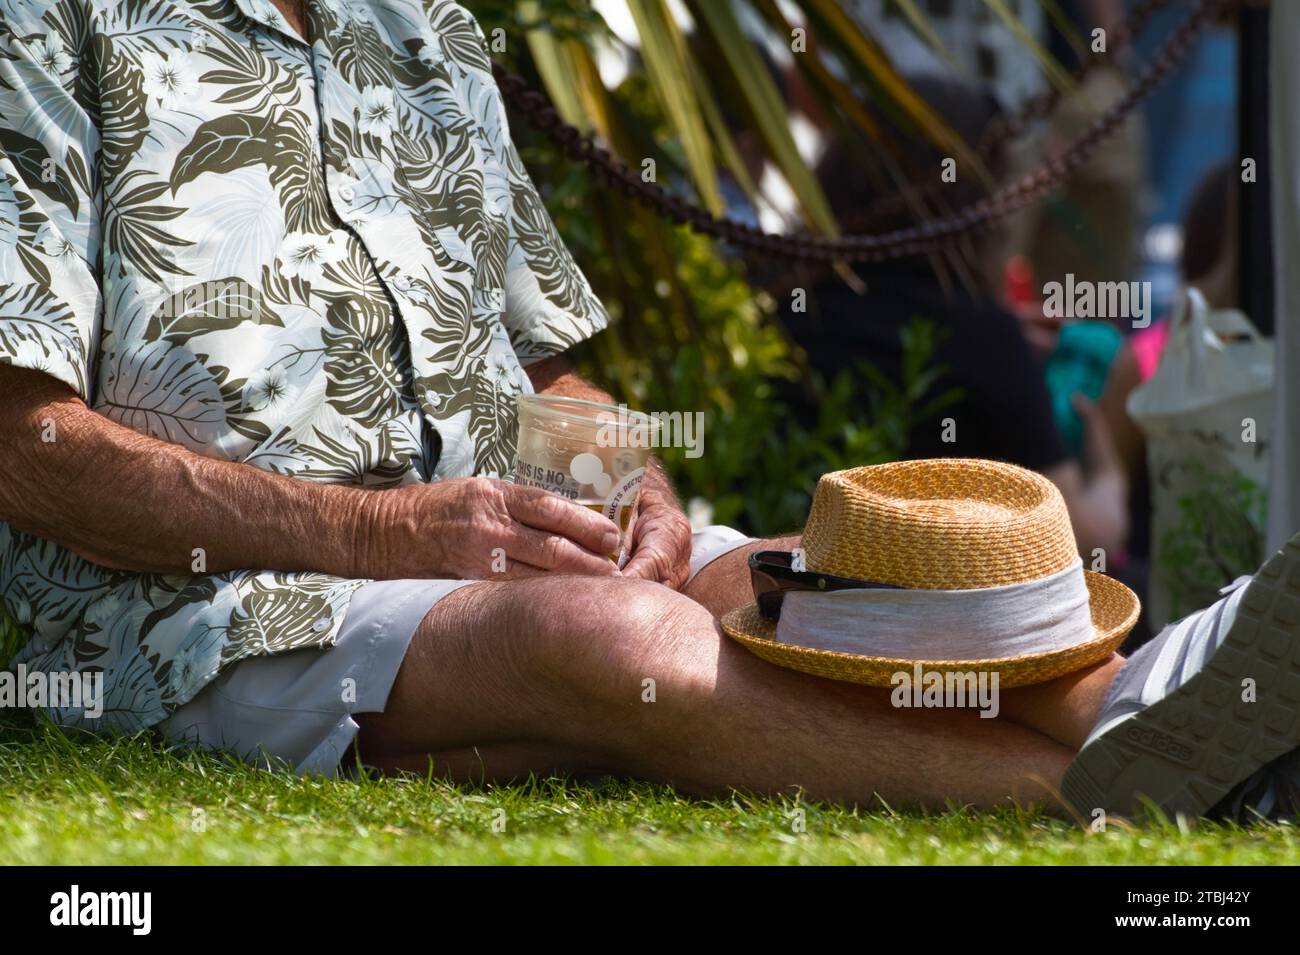 Man In Summer Short Sleeved Shirt Sitting On The Grass With A Pint In A Plastic Cup And Straw TRilby Balanced On His Legs, UK Stock Photo